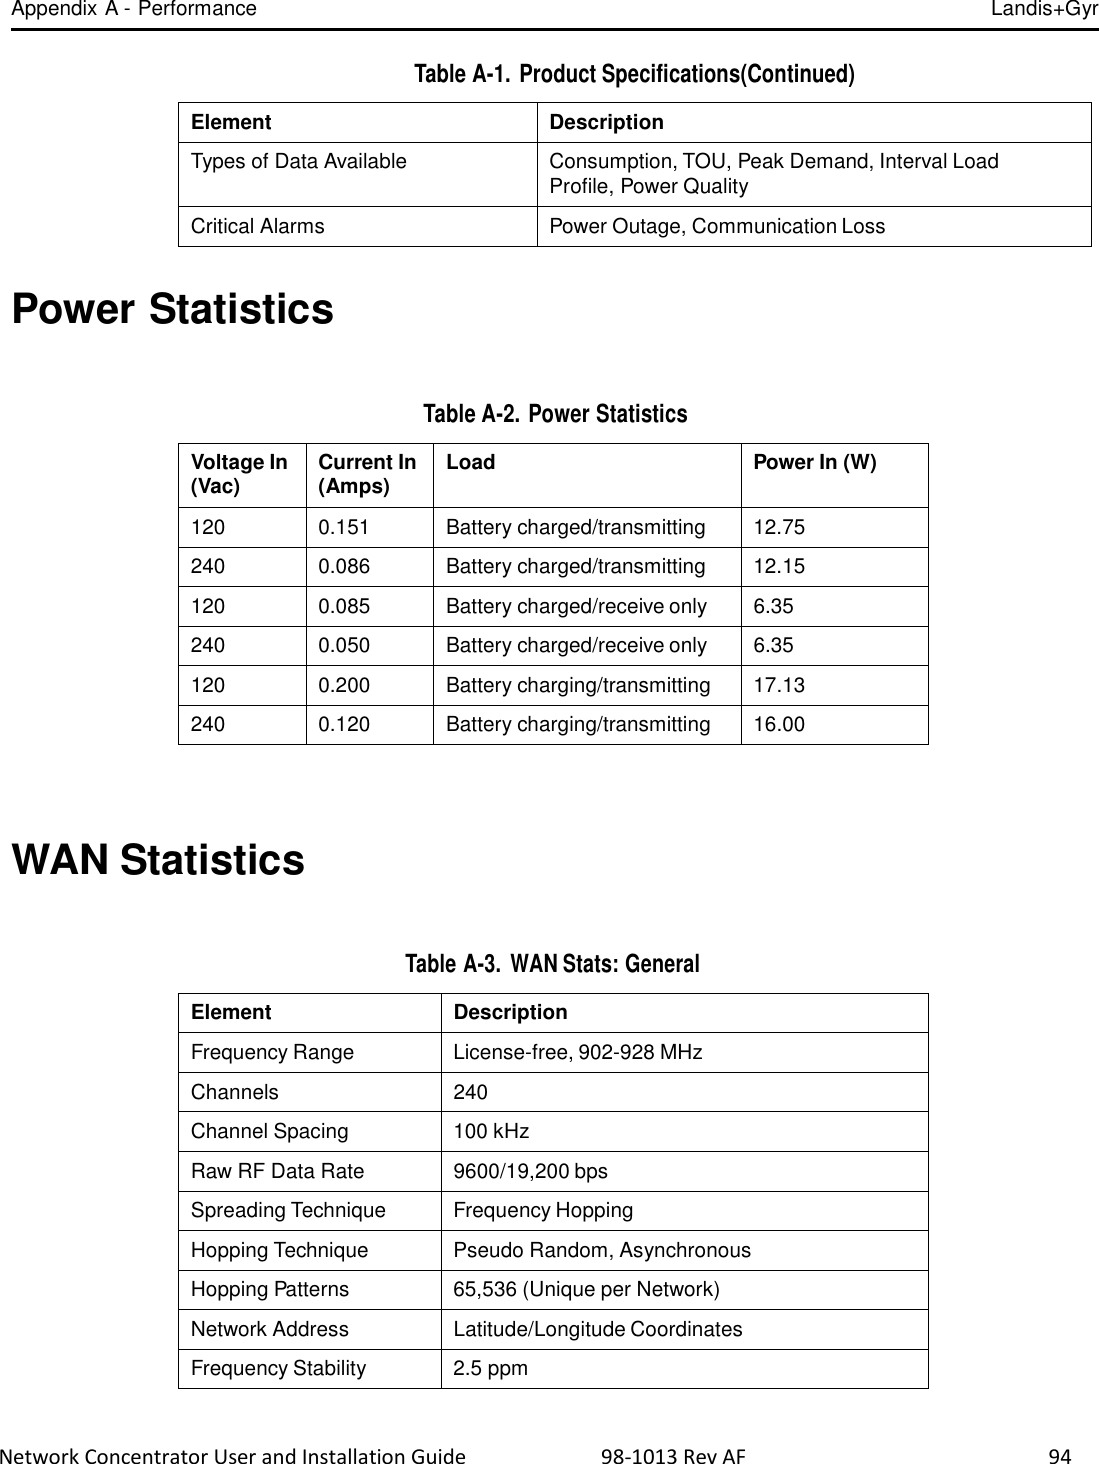 Appendix A - Performance Landis+Gyr  Network Concentrator User and Installation Guide                          98-1013 Rev AF    94     Table A-1. Product Specifications(Continued)  Element Description Types of Data Available Consumption, TOU, Peak Demand, Interval Load Profile, Power Quality Critical Alarms Power Outage, Communication Loss   Power Statistics    Table A-2. Power Statistics  Voltage In (Vac) Current In (Amps) Load Power In (W) 120 0.151 Battery charged/transmitting 12.75 240 0.086 Battery charged/transmitting 12.15 120 0.085 Battery charged/receive only 6.35 240 0.050 Battery charged/receive only 6.35 120 0.200 Battery charging/transmitting 17.13 240 0.120 Battery charging/transmitting 16.00     WAN Statistics      Table A-3.  WAN Stats: General  Element Description Frequency Range License-free, 902-928 MHz Channels 240 Channel Spacing 100 kHz Raw RF Data Rate 9600/19,200 bps Spreading Technique Frequency Hopping Hopping Technique Pseudo Random, Asynchronous Hopping Patterns 65,536 (Unique per Network) Network Address Latitude/Longitude Coordinates Frequency Stability 2.5 ppm 